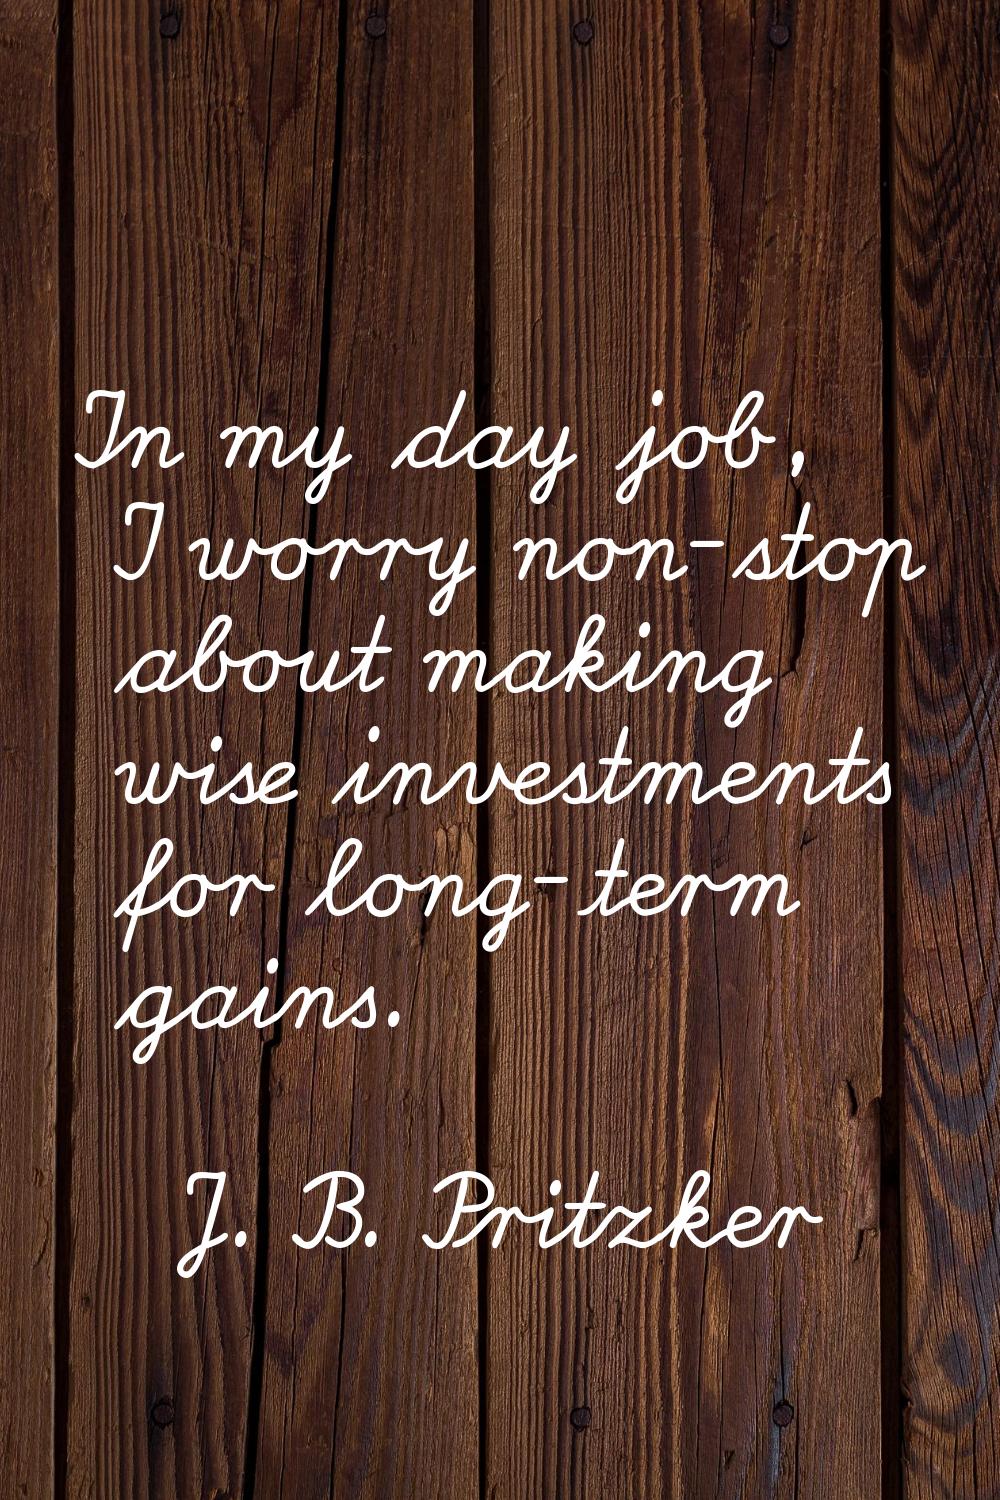 In my day job, I worry non-stop about making wise investments for long-term gains.